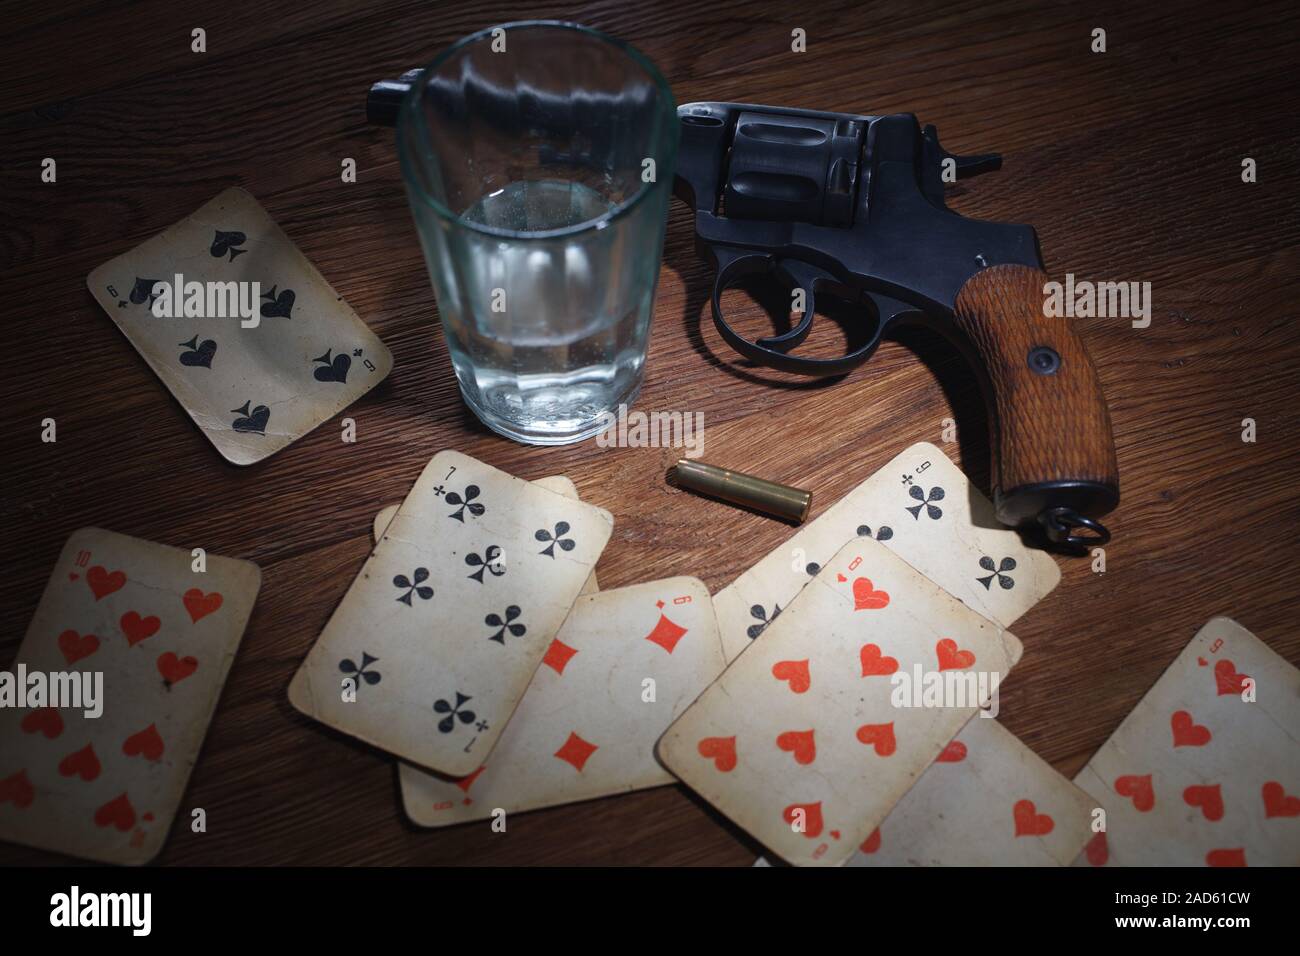 Russian Roulette With The Bullet Out Concept Of Play, Risking His Own Life  Stock Photo, Picture and Royalty Free Image. Image 23193912.